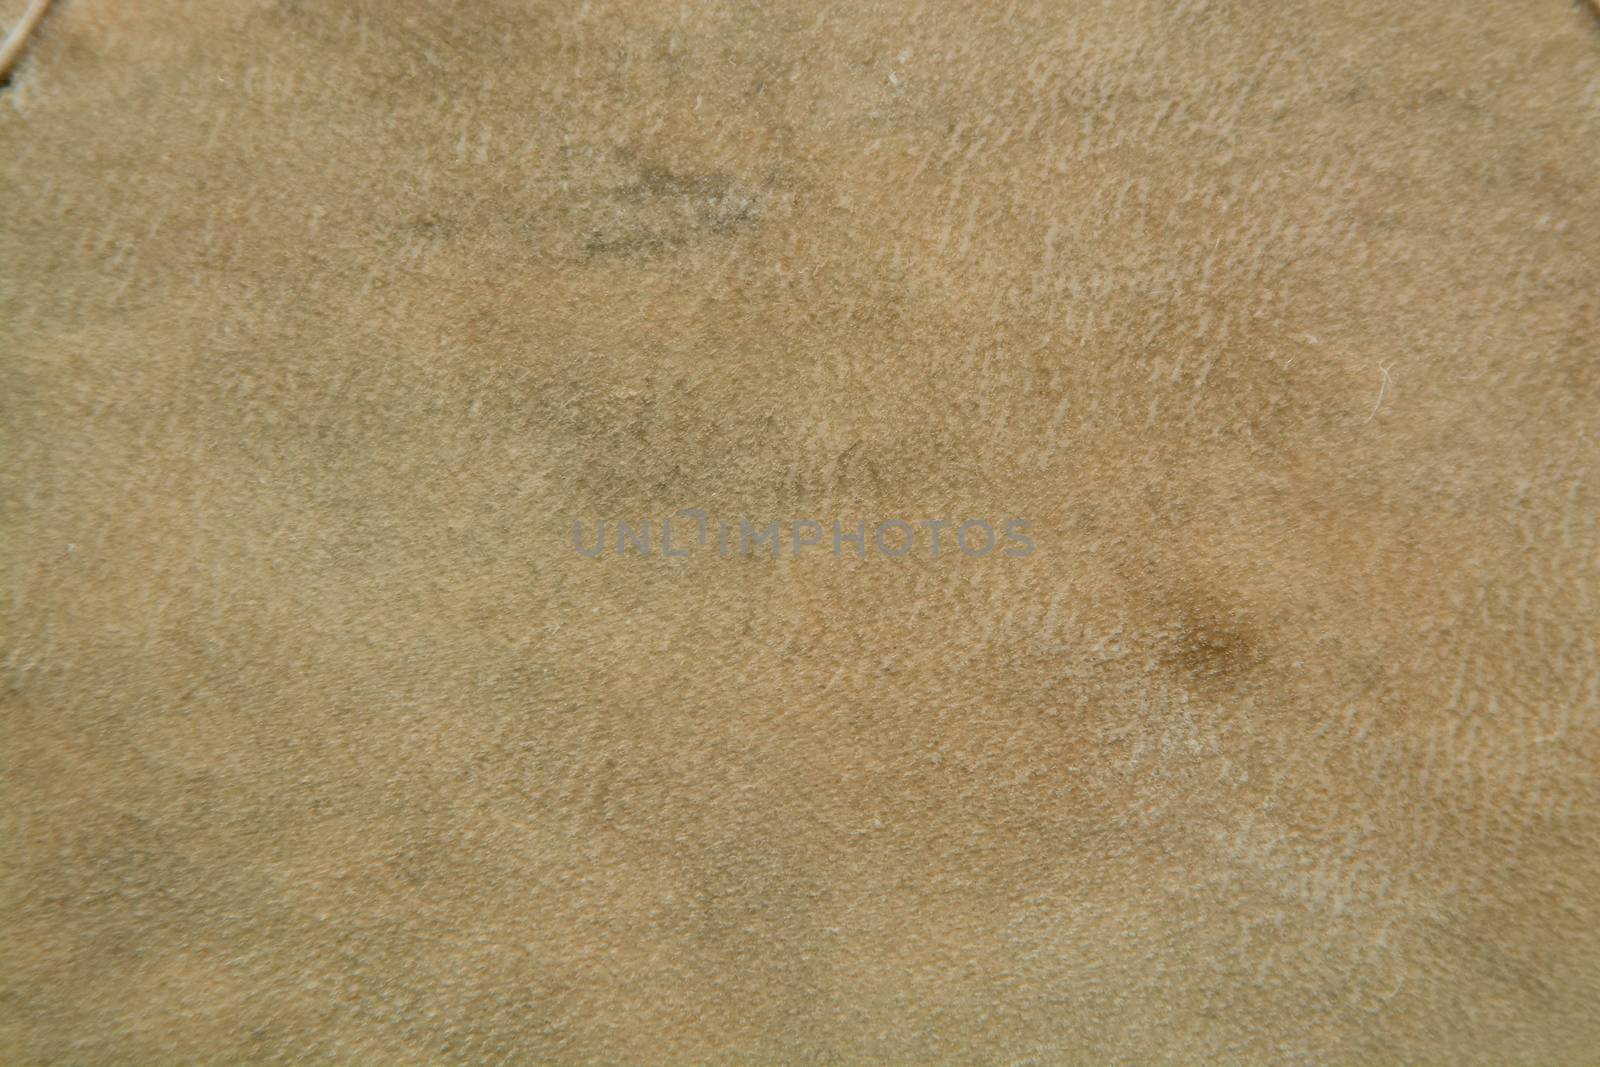 Backgraund texture of real leather tanned for drum in light colors.